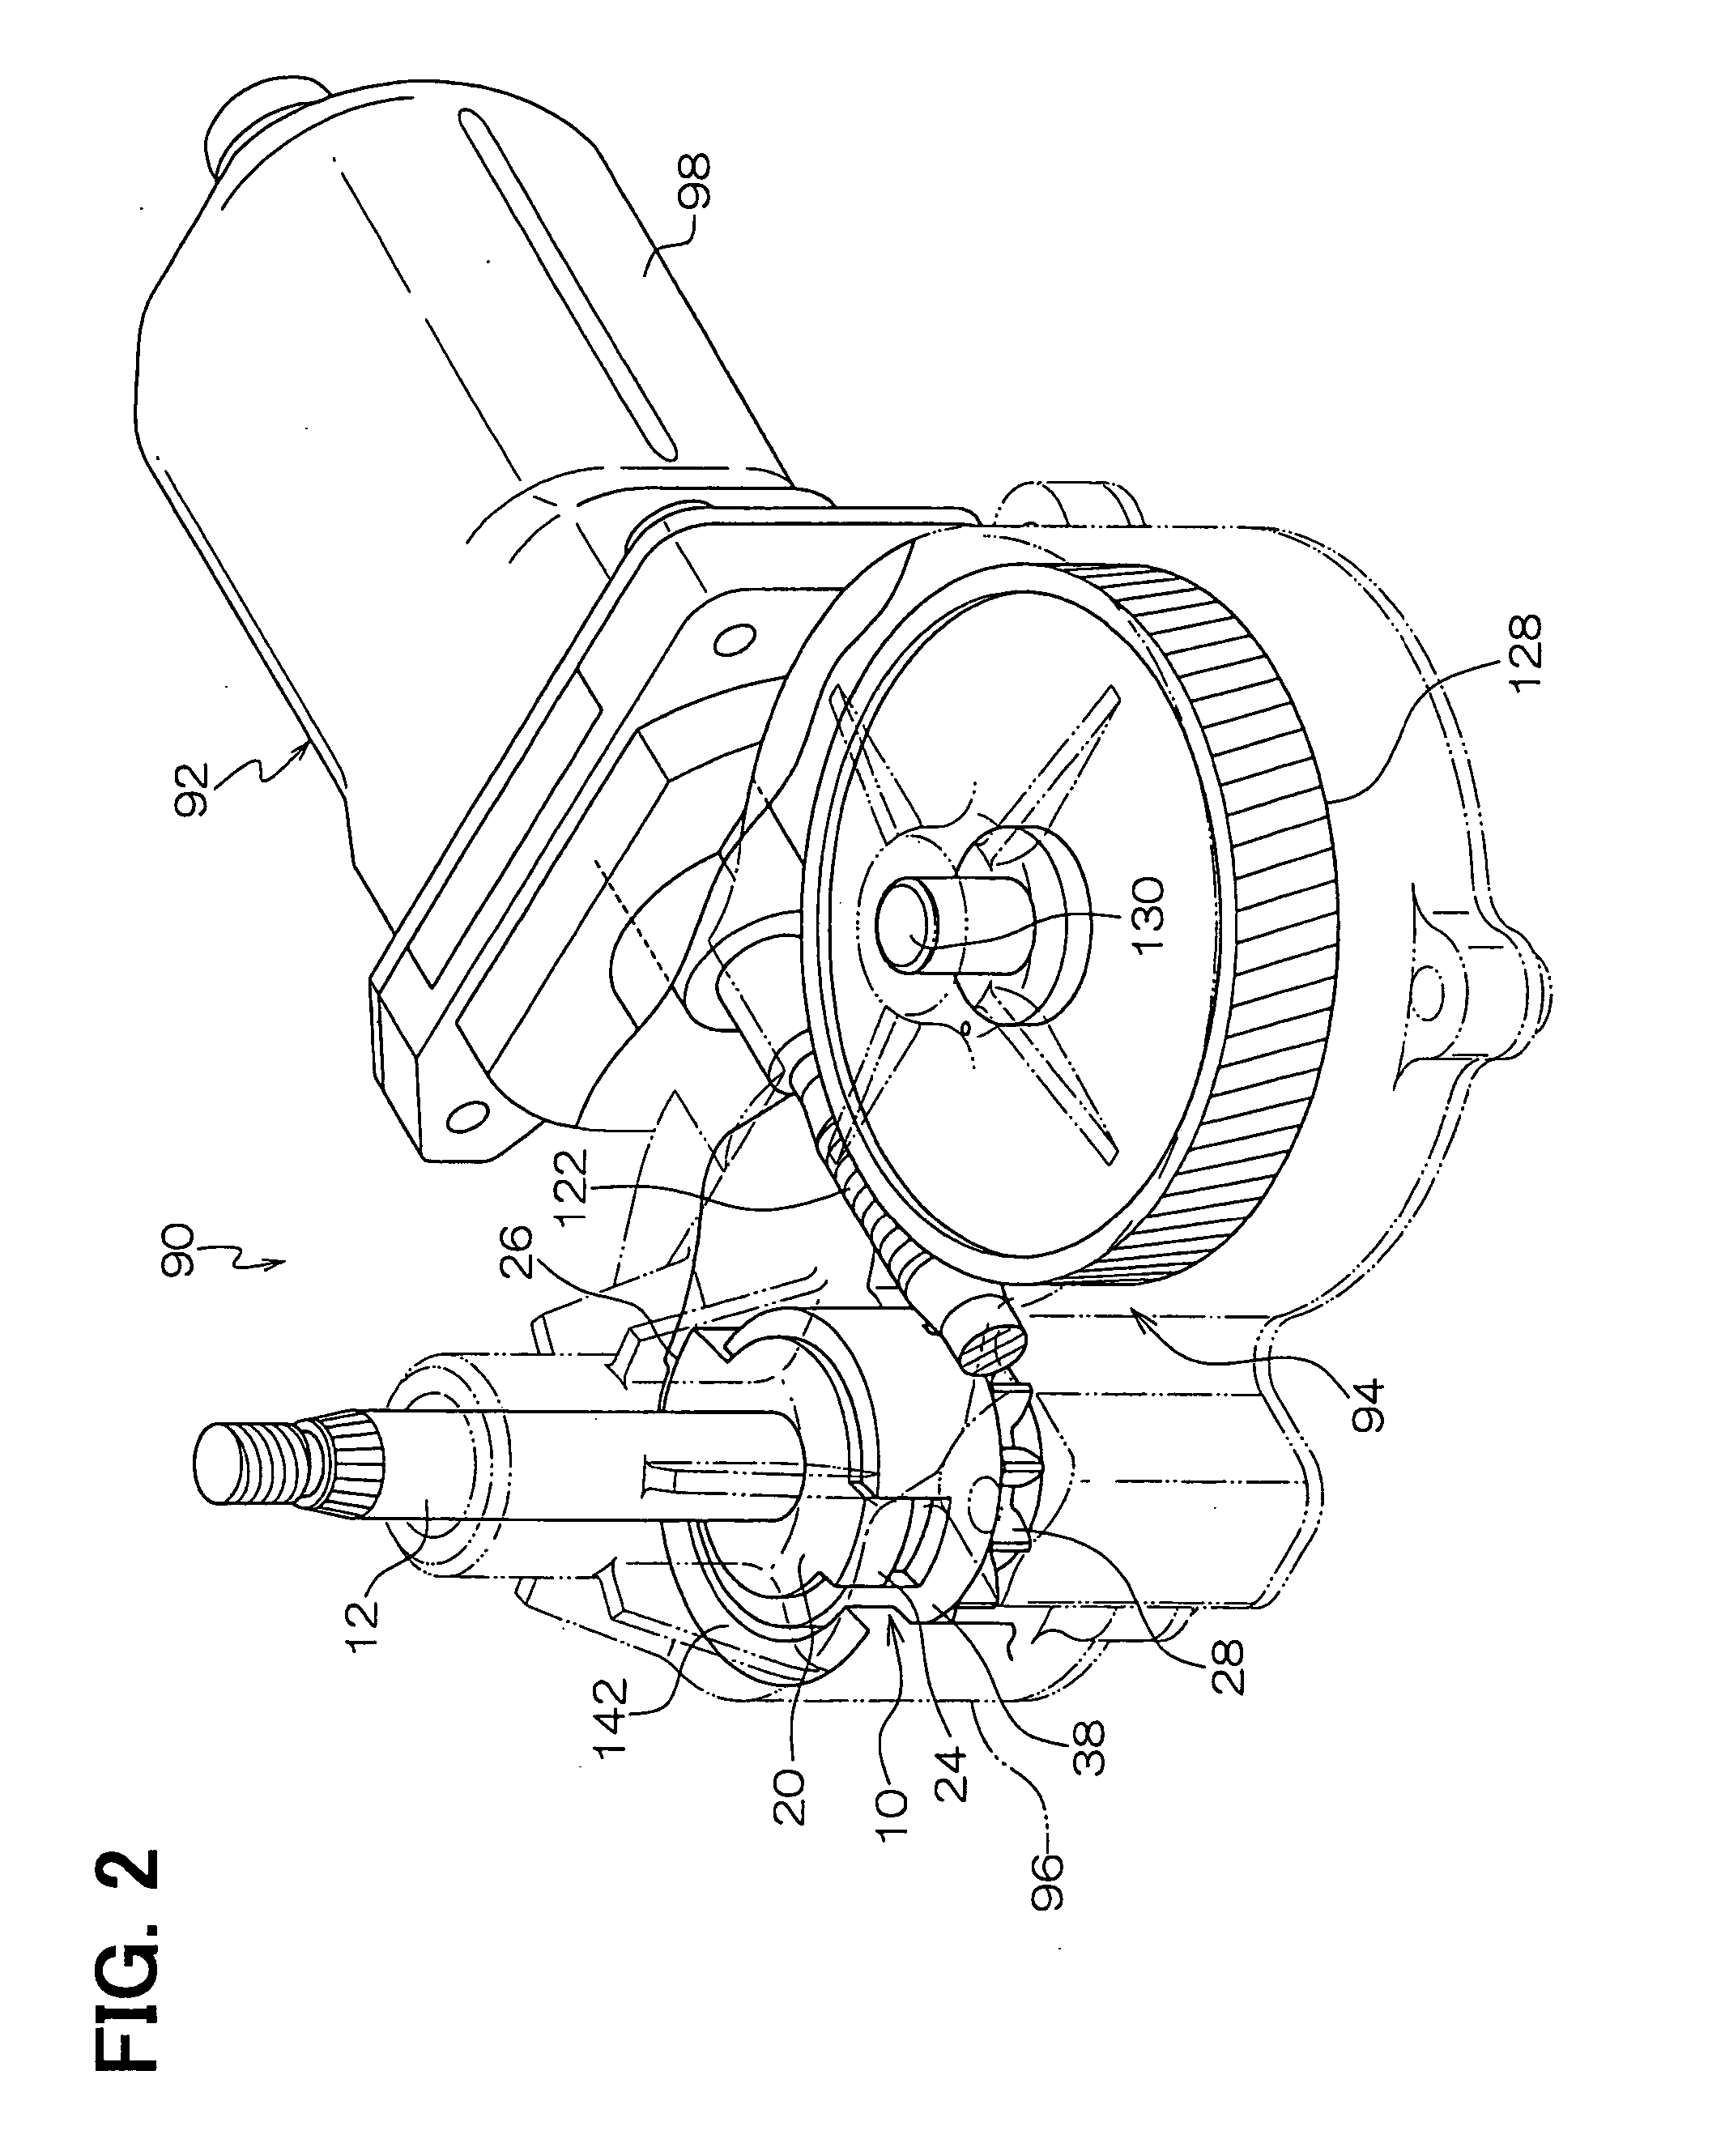 Clutch device, motor apparatus and wiper system